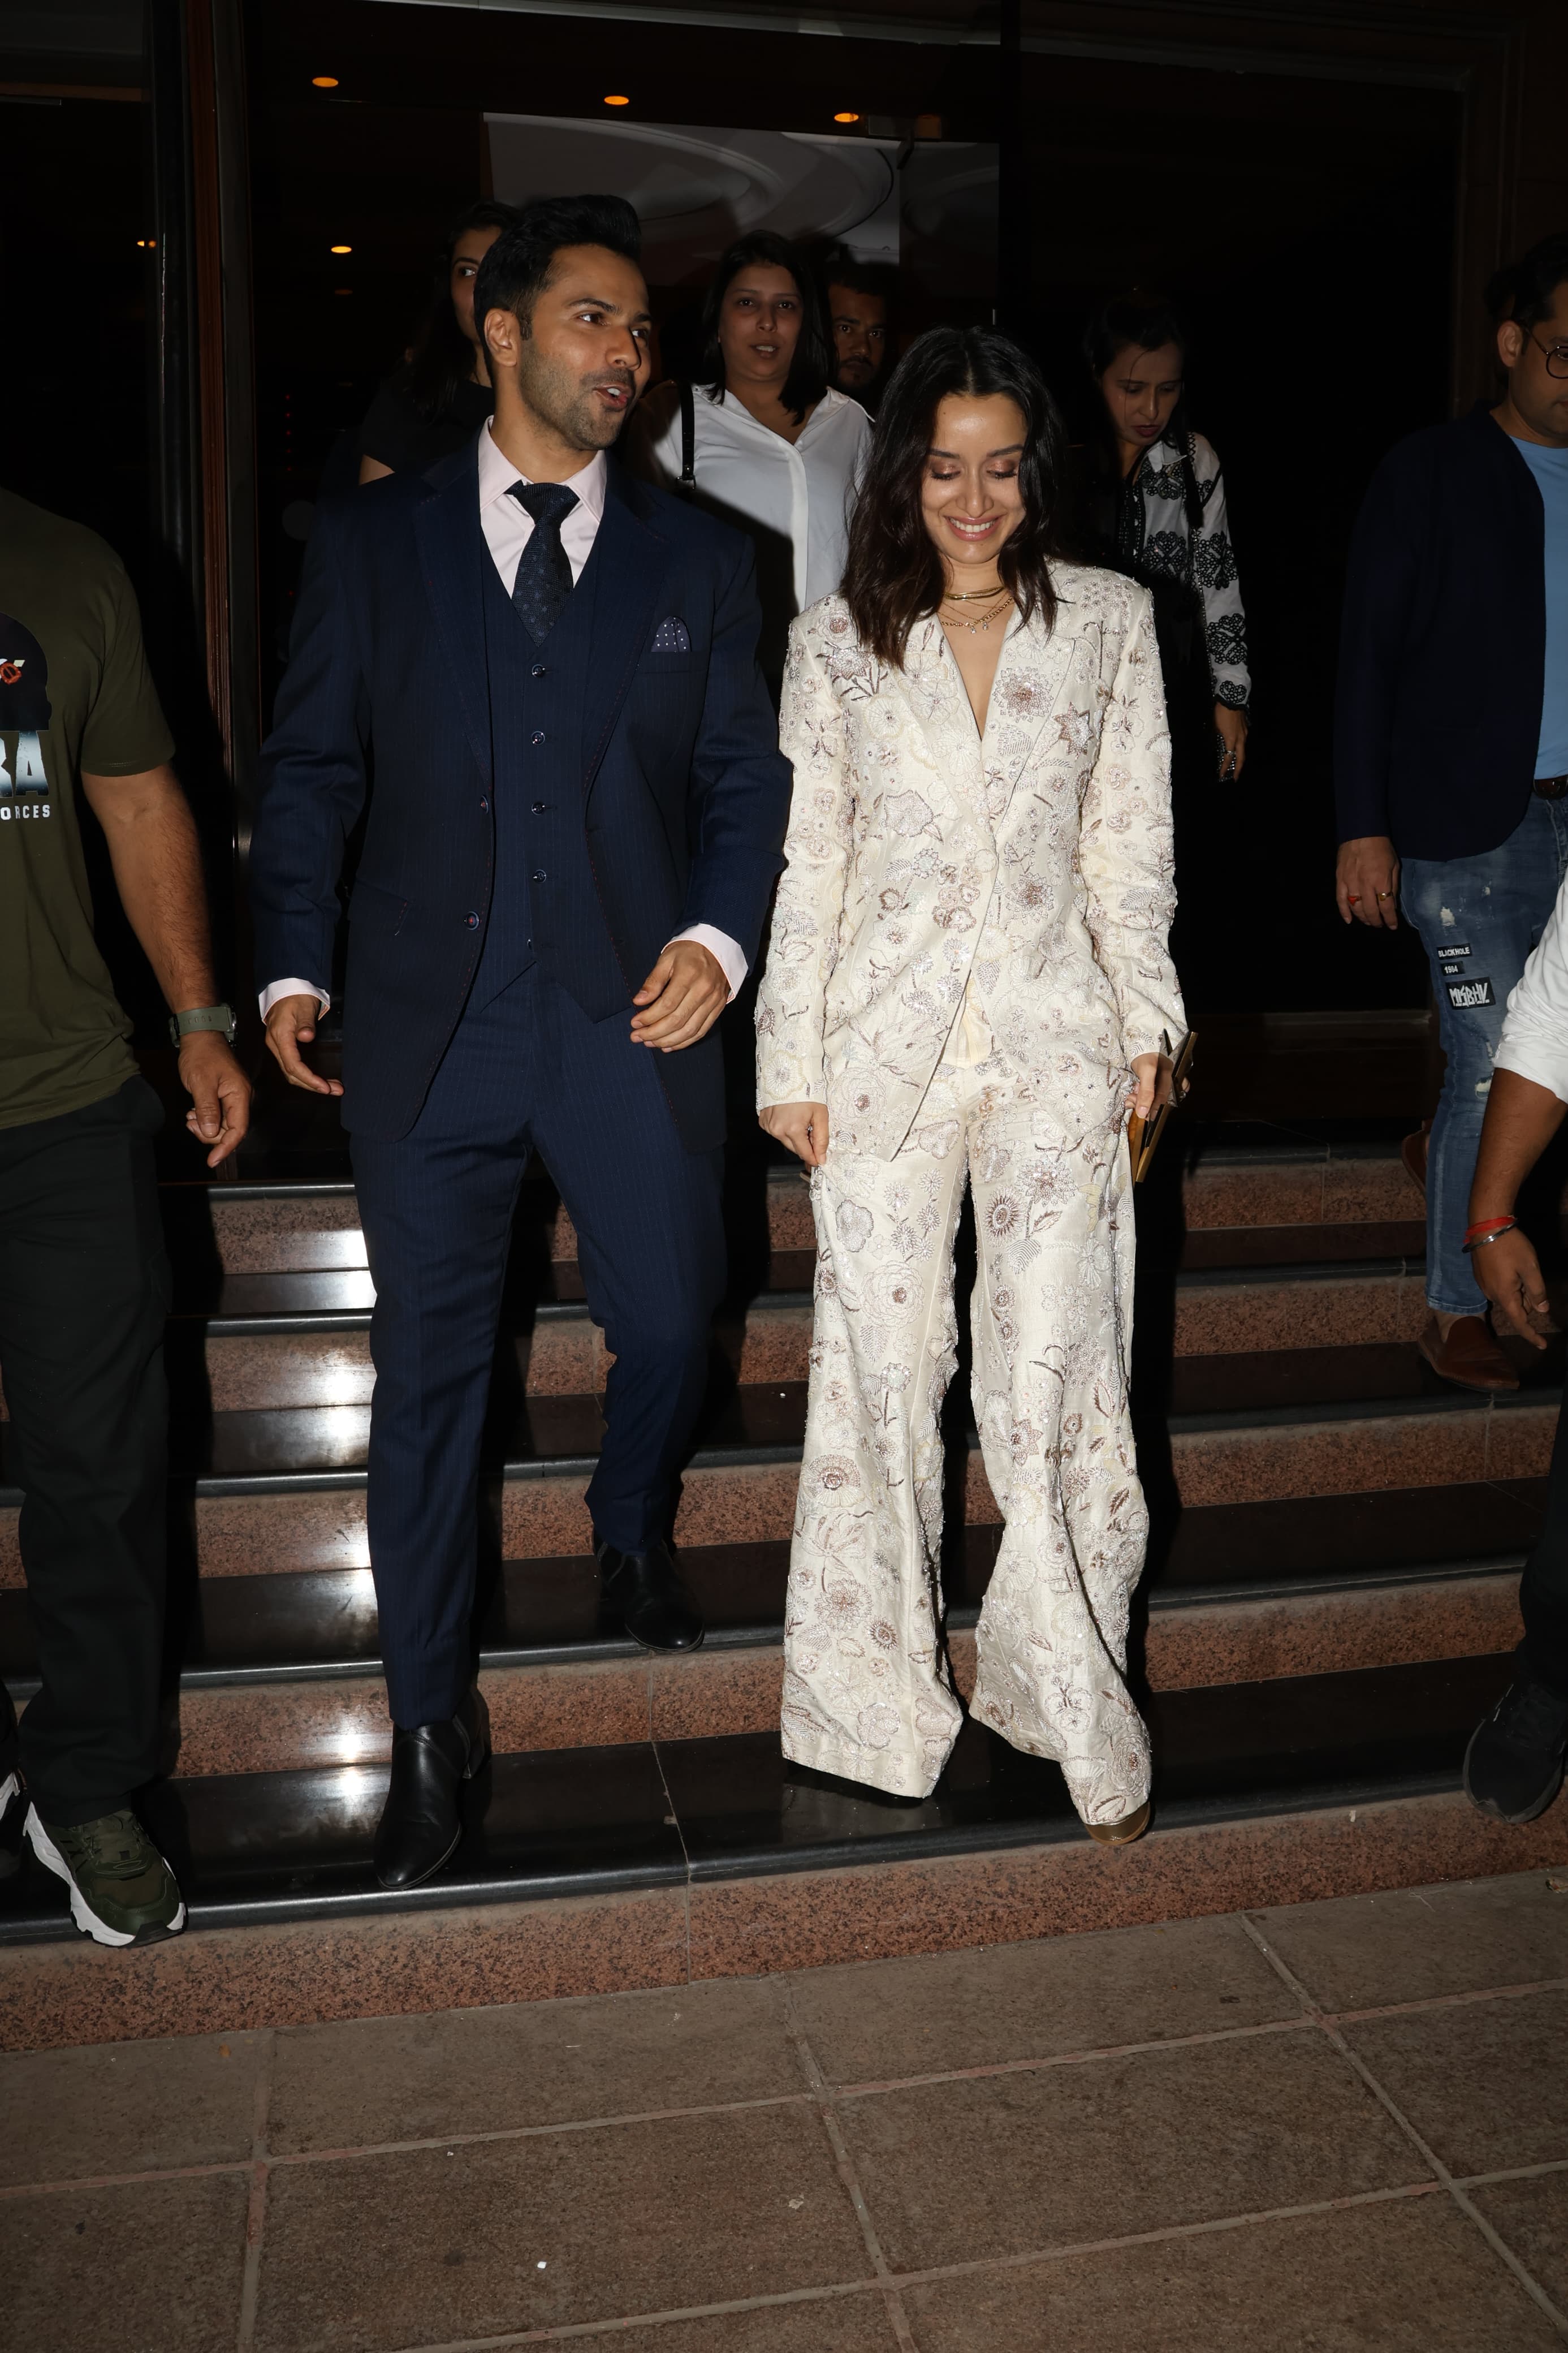 Shraddha Kapoor and Varun Dhawan looked super smart in formal wears as the two were clicked together